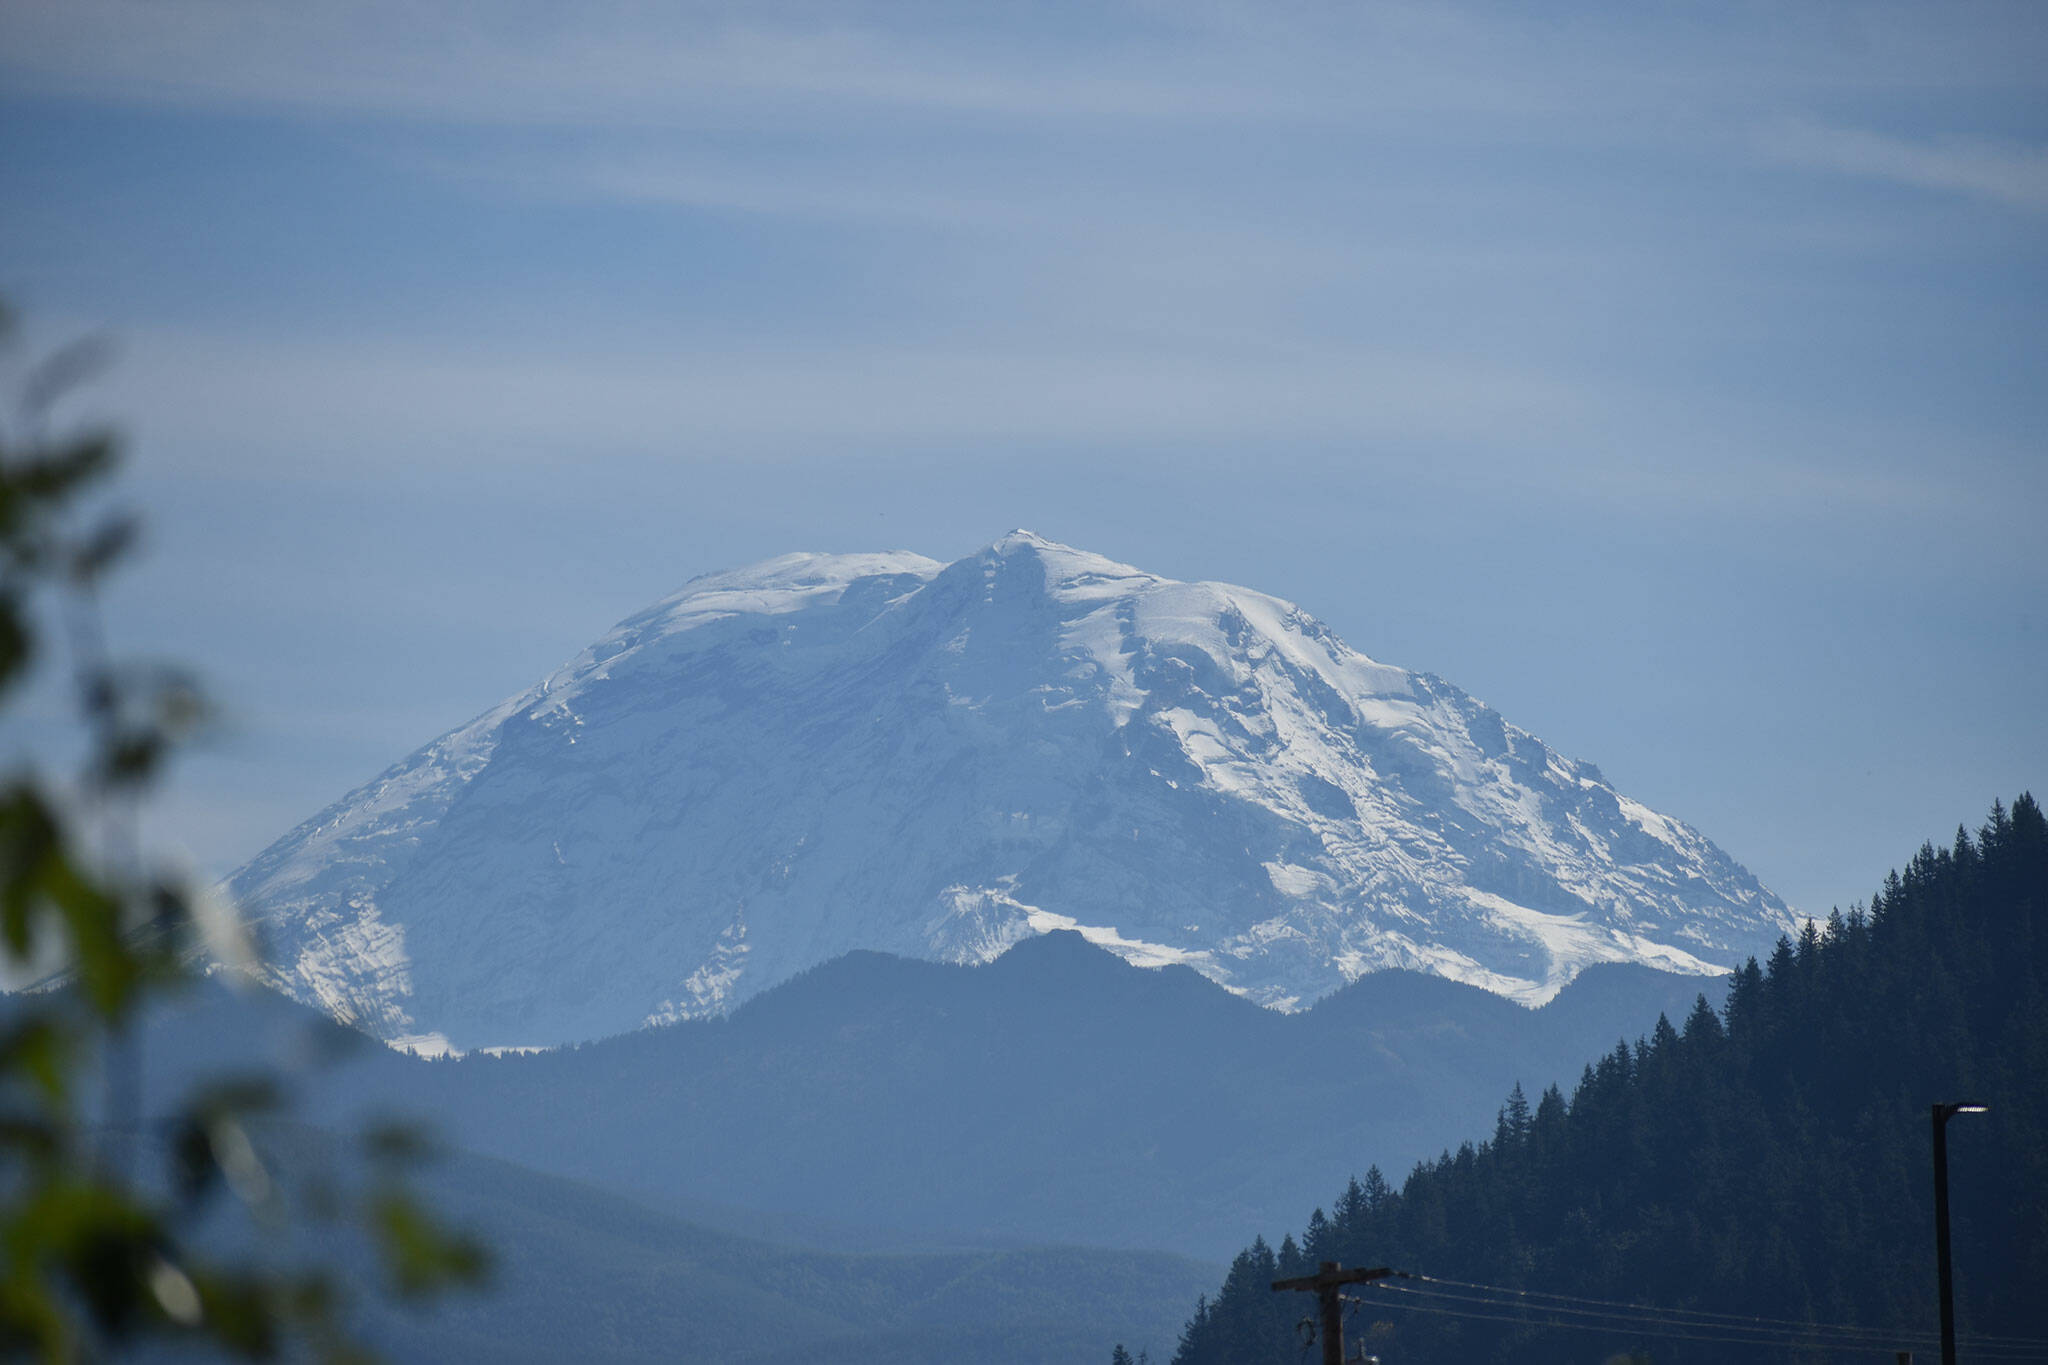 This photo of Mount Rainier, snapped Sept. 21 from Enumclaw, shows the mountain having regained its snowy coat.